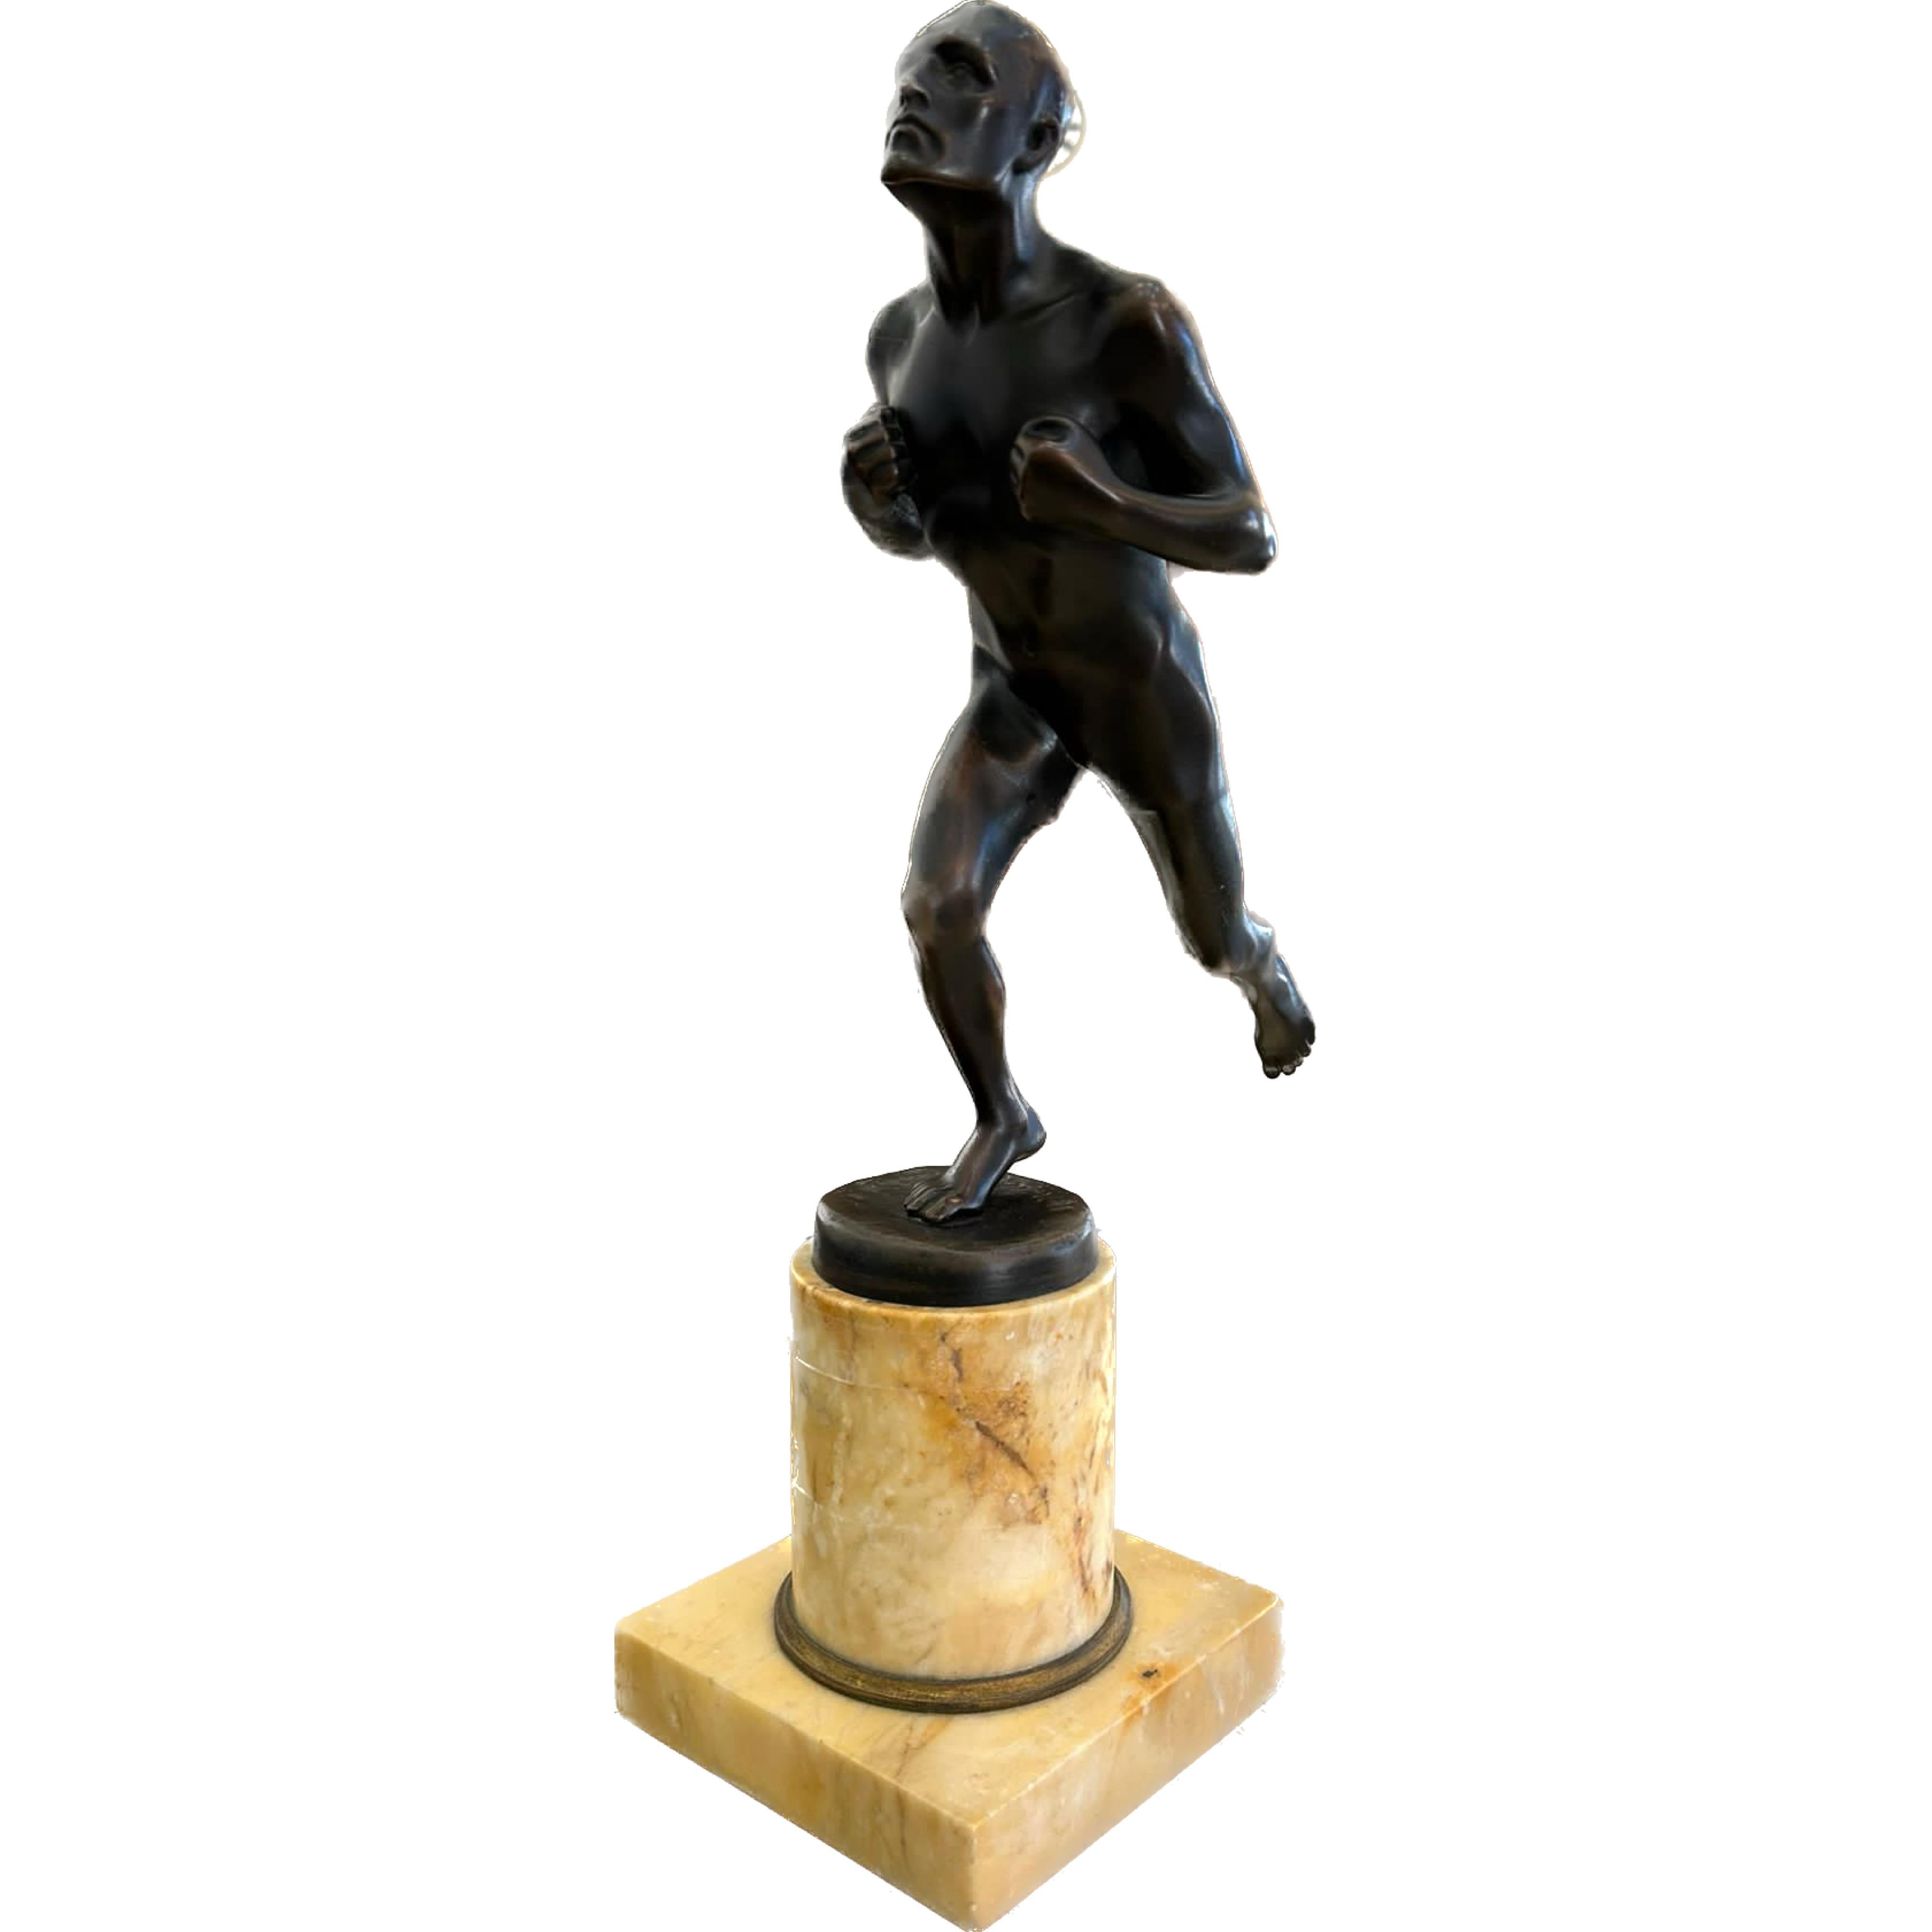 Hans Muller (Austria, 1873-1937) bronze sculpture of a nude male figure, depicted with his hands to his chest and running, mounted on a Sienna marble base. This is a nice present for a runner or for yourself. Signed H. Müller and foundry mark.
This